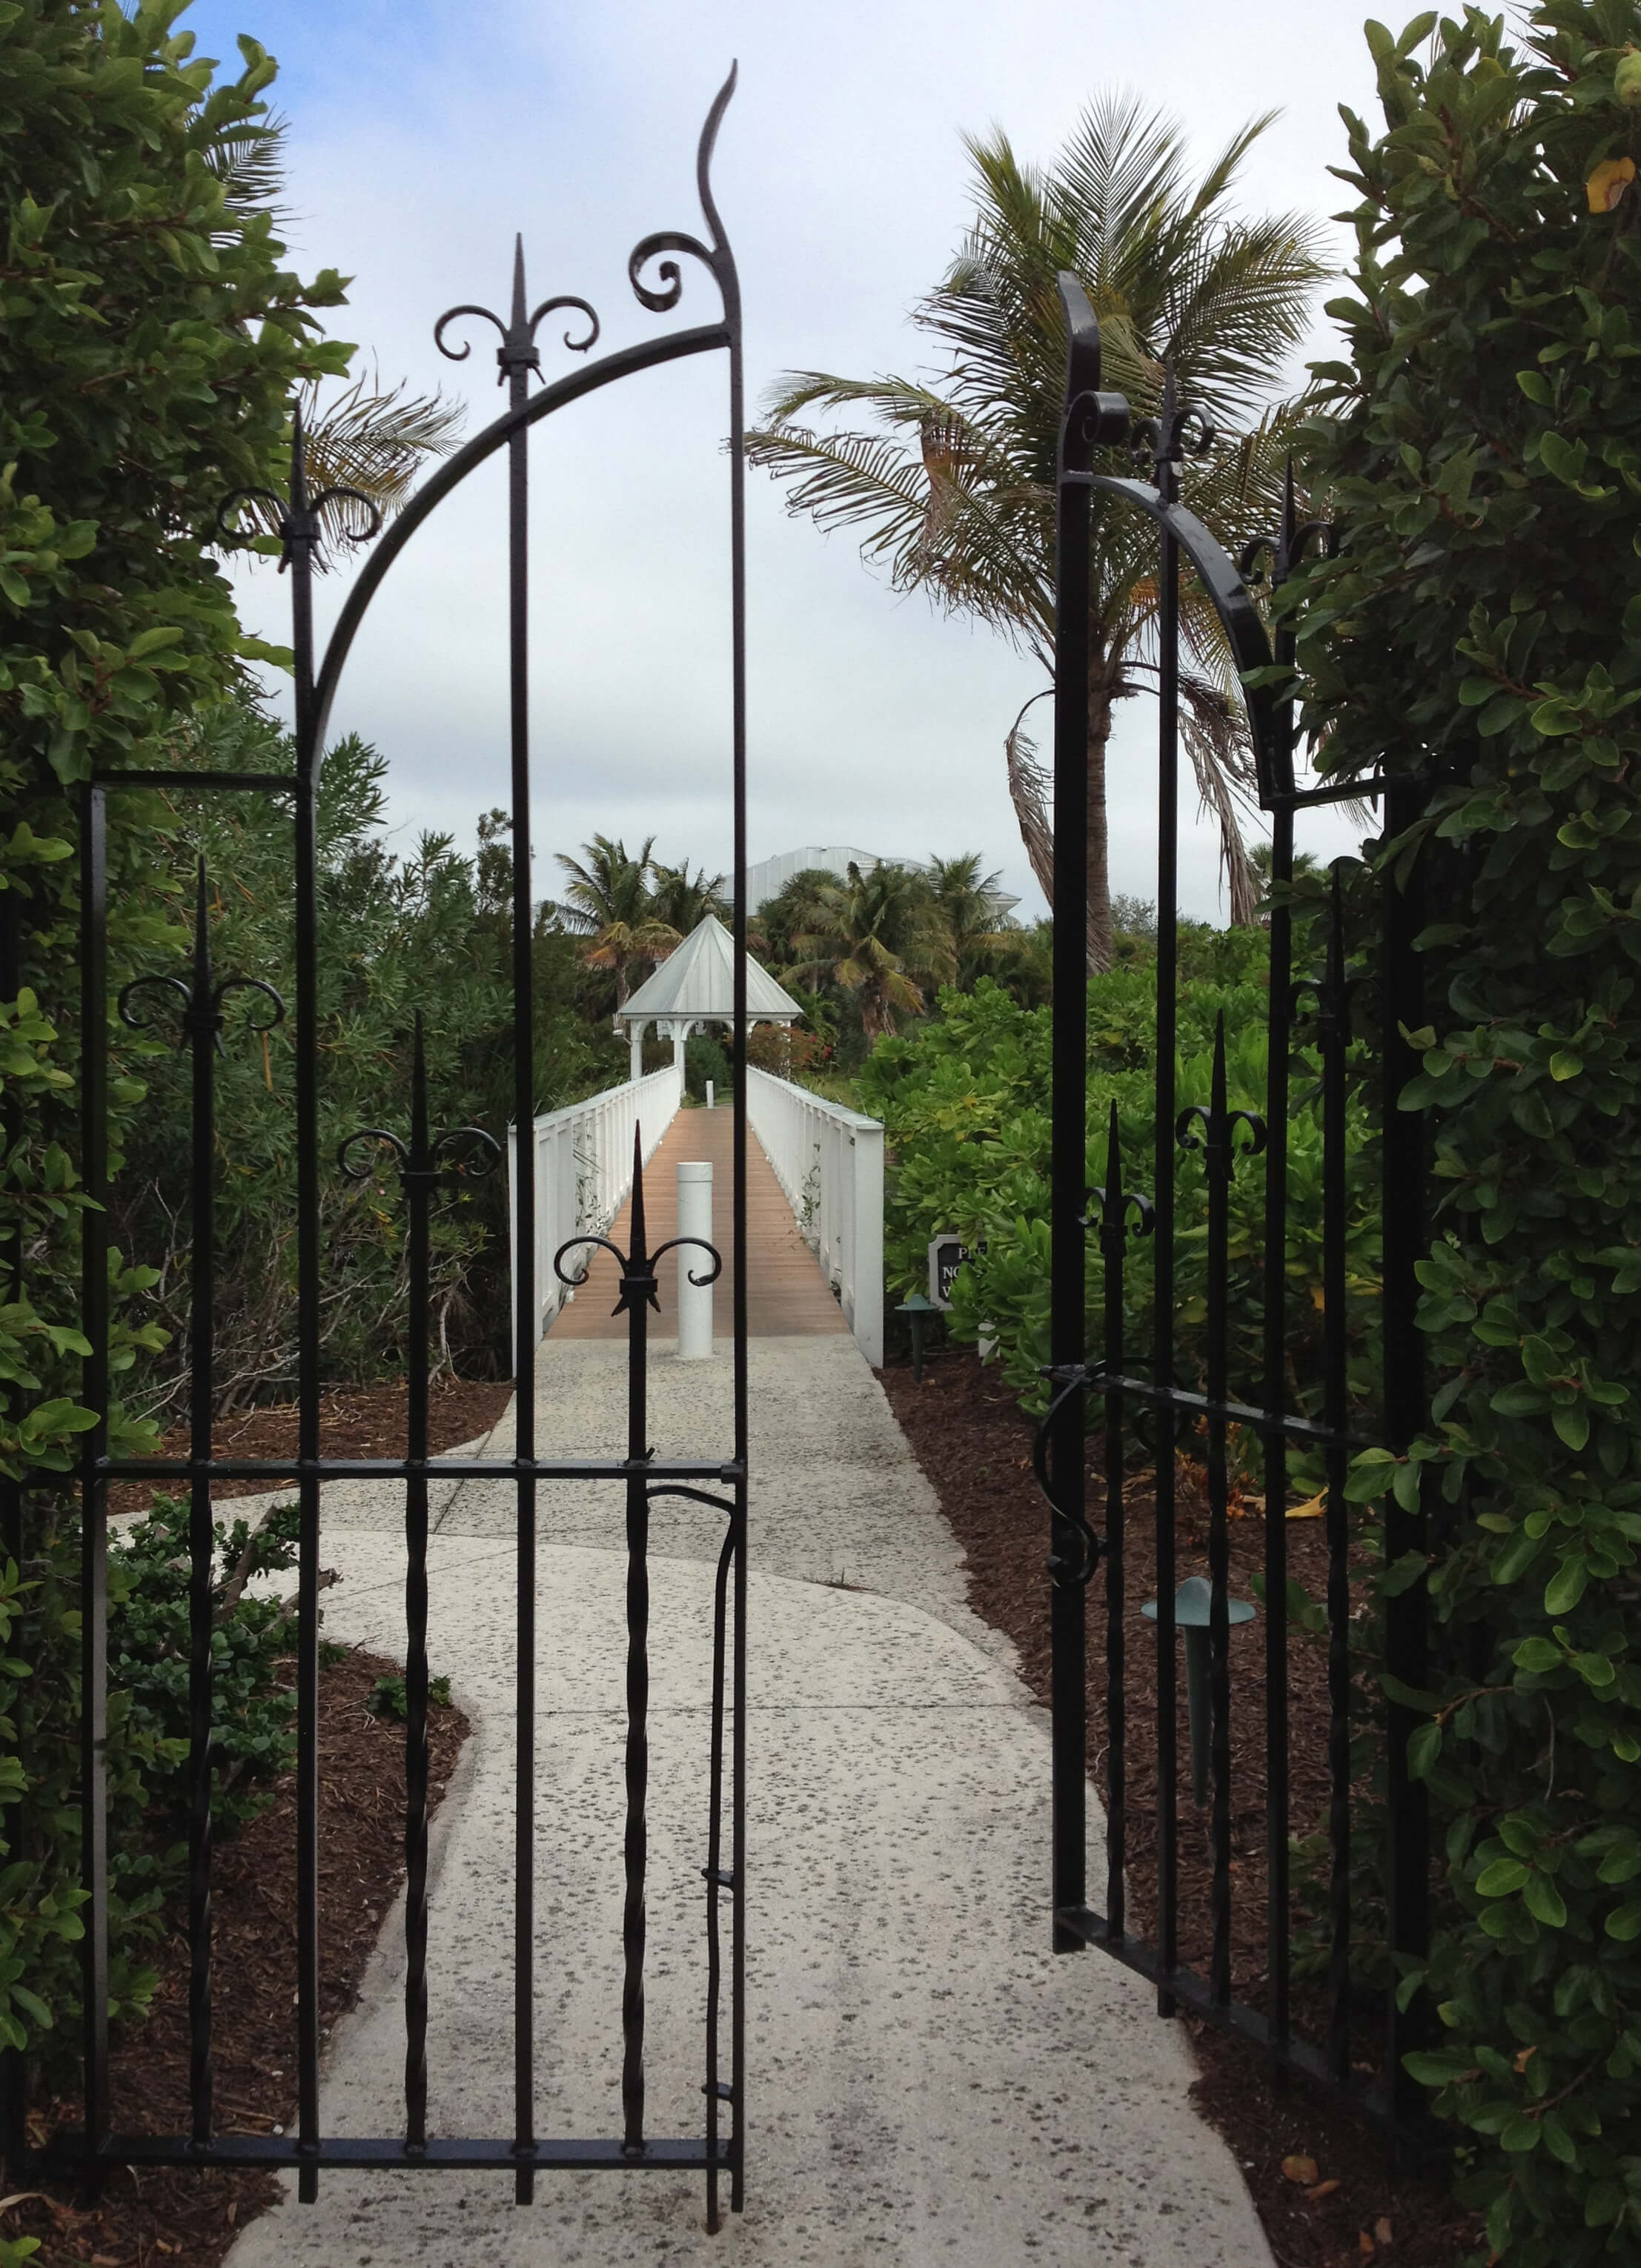 An open gate on an island of many gated communities